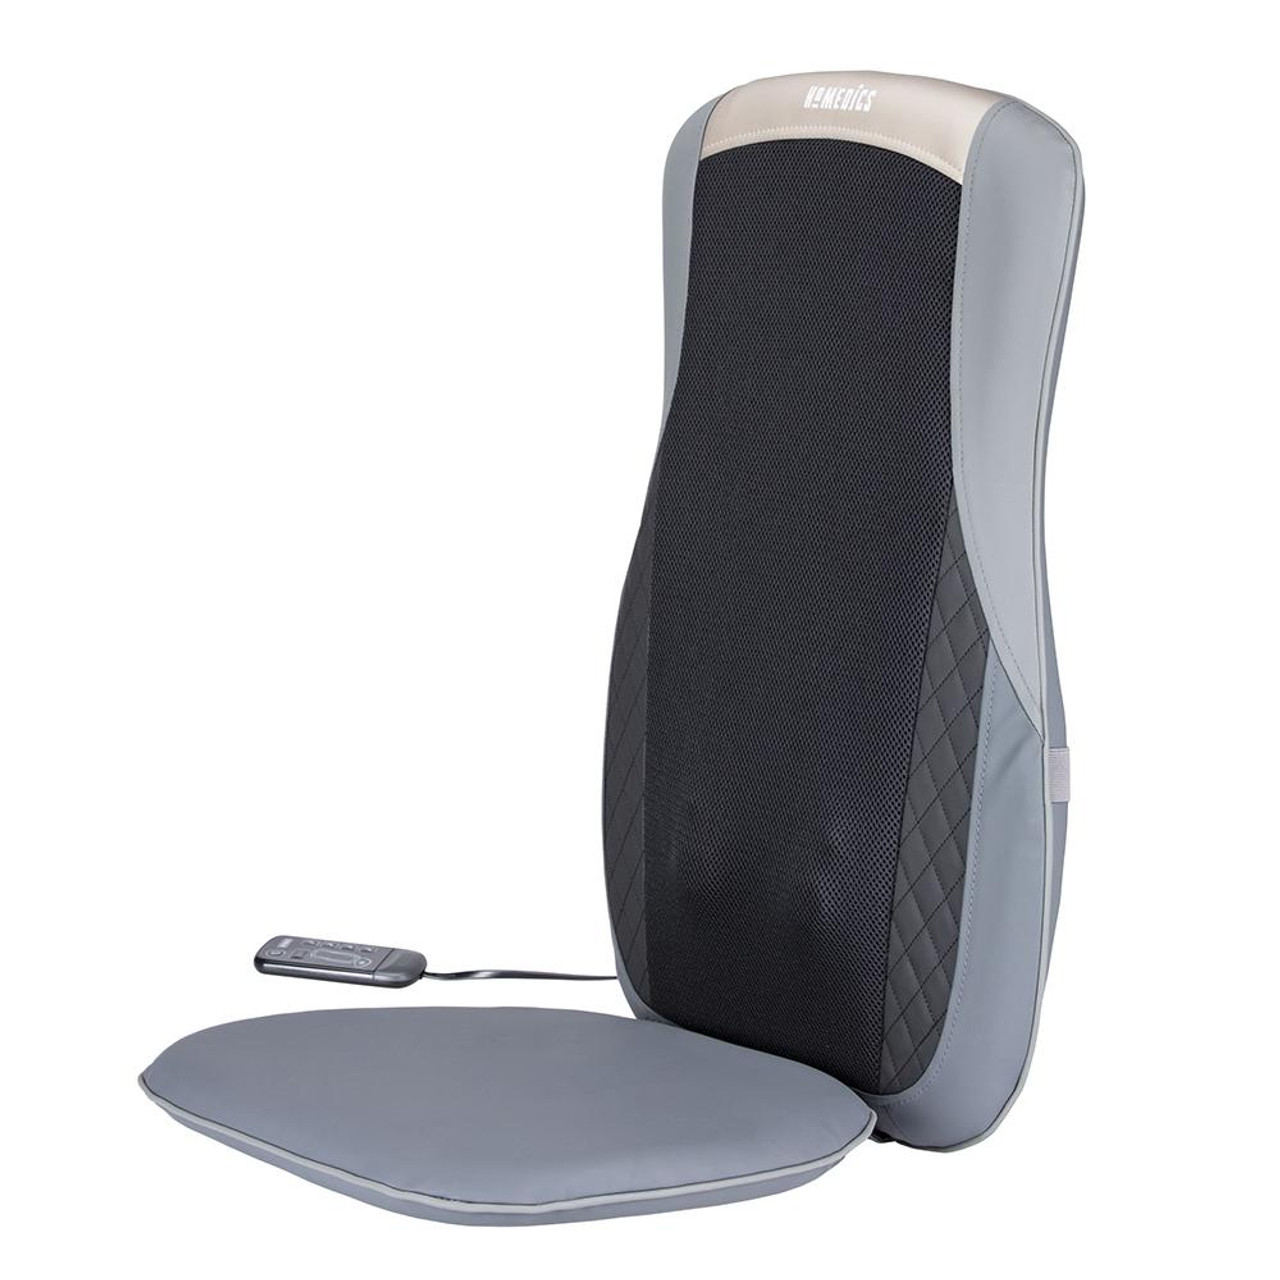 Cordless Shiatsu All in One Heated Massager – bePampered.